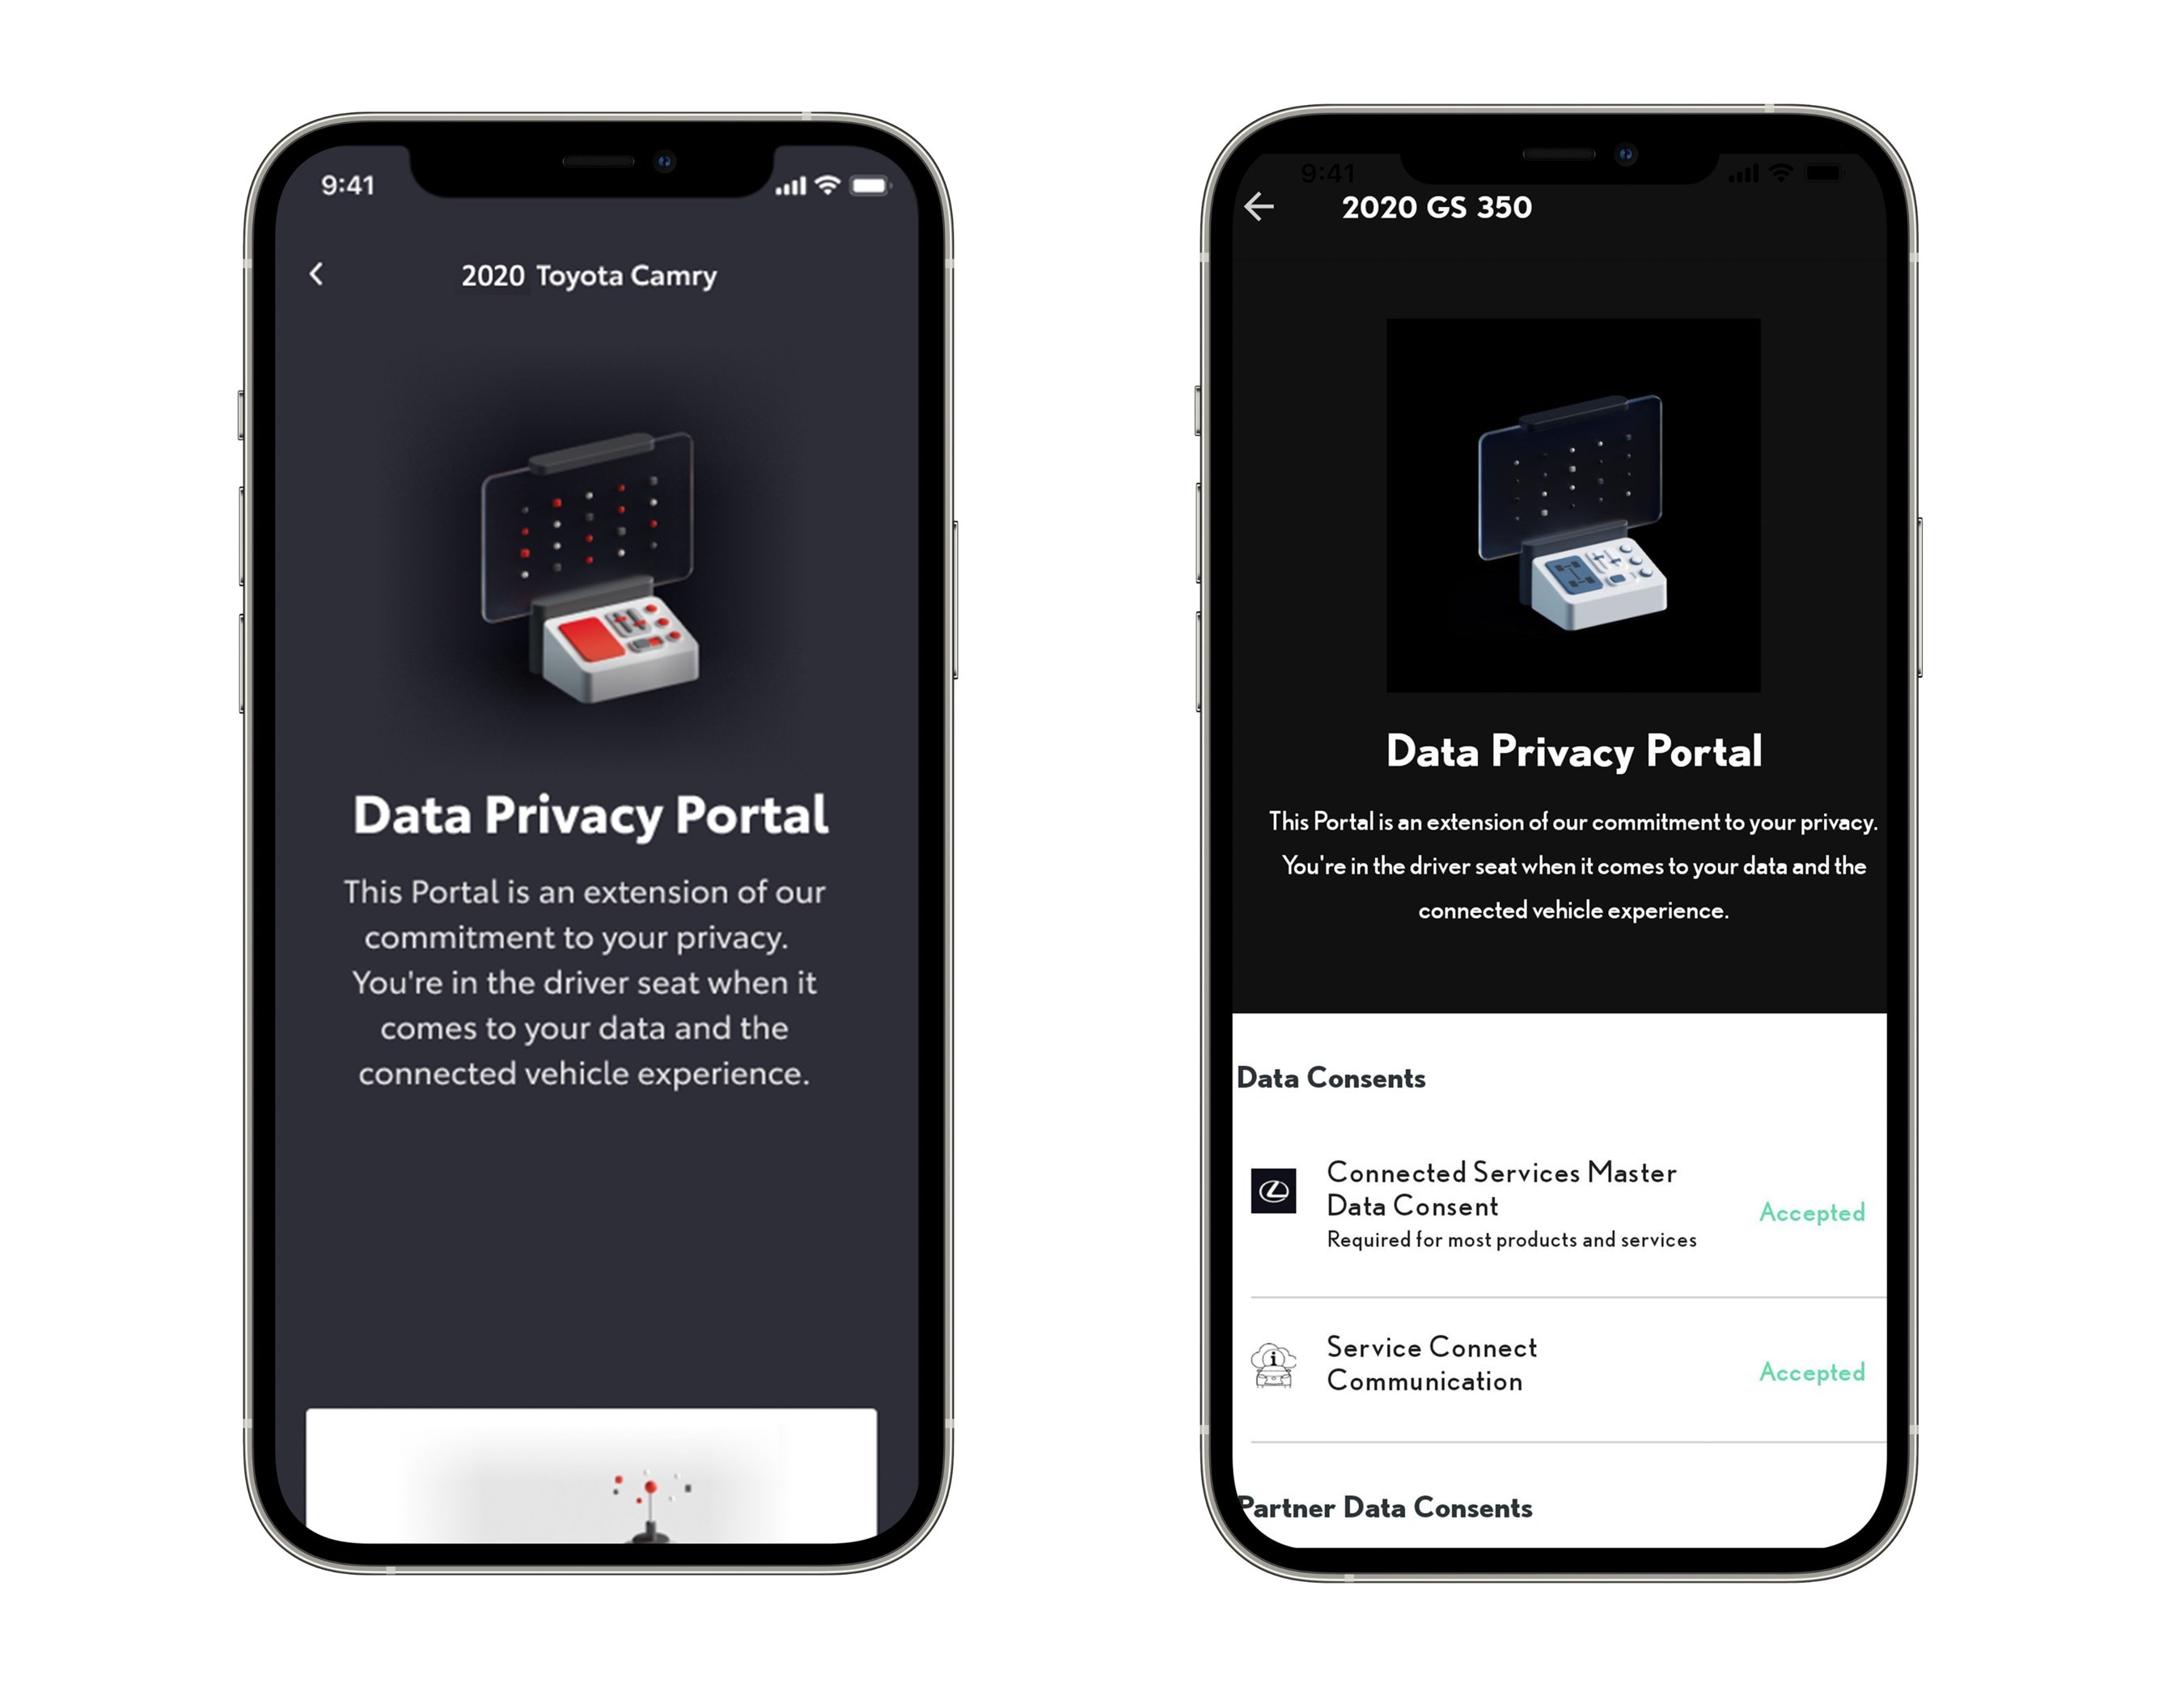 Toyota Motor North America (TMNA) announces the creation of the Toyota Data Privacy Portal to increase data transparency, accessibility and control for Toyota and Lexus vehicle owners.